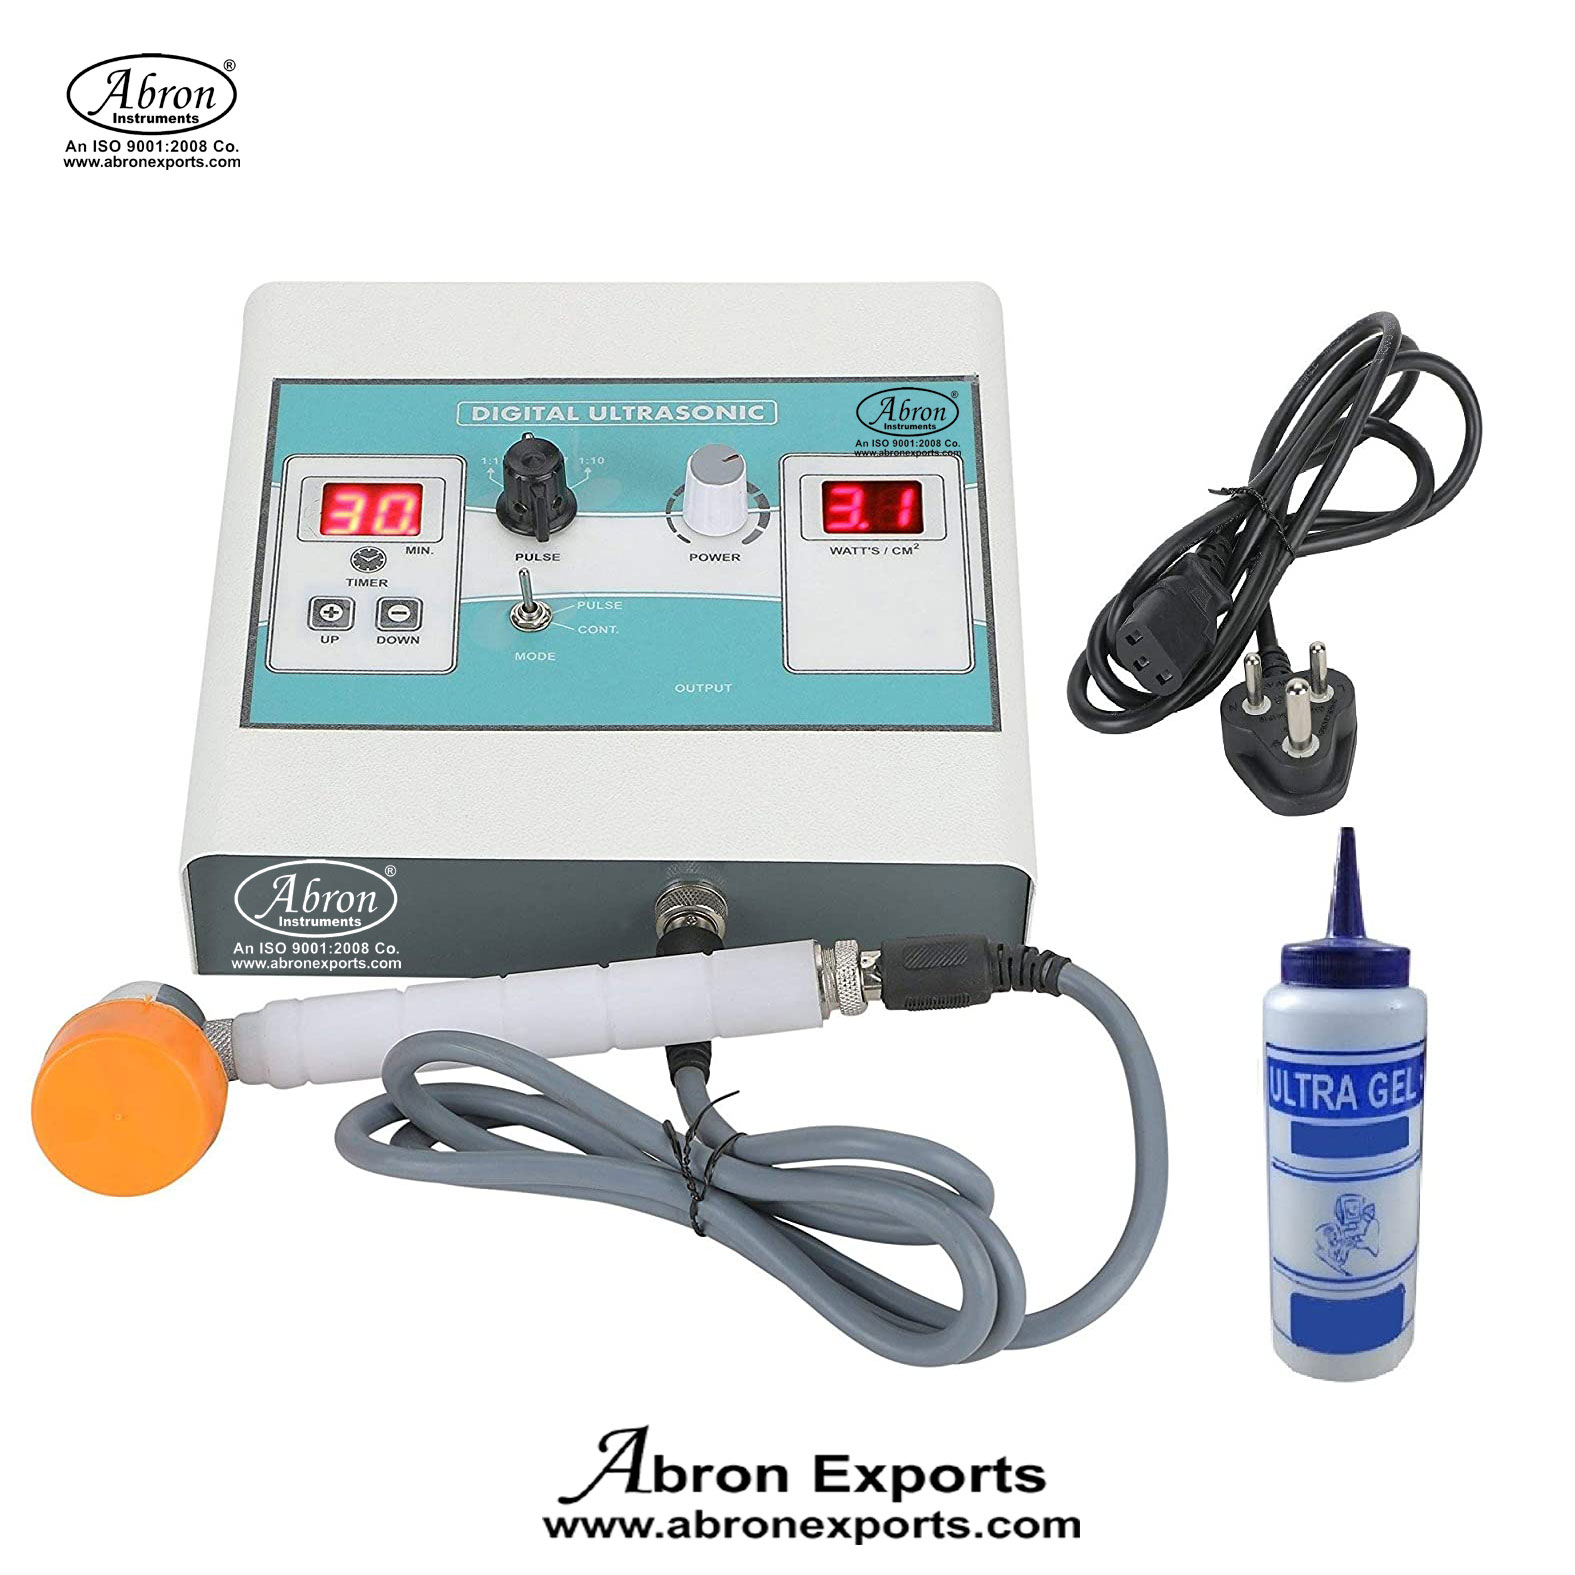 Ultrasonic Machine For Pain Relief Electrotherapy Physiotherapy Mini Therapeutic Abron ABM-2602